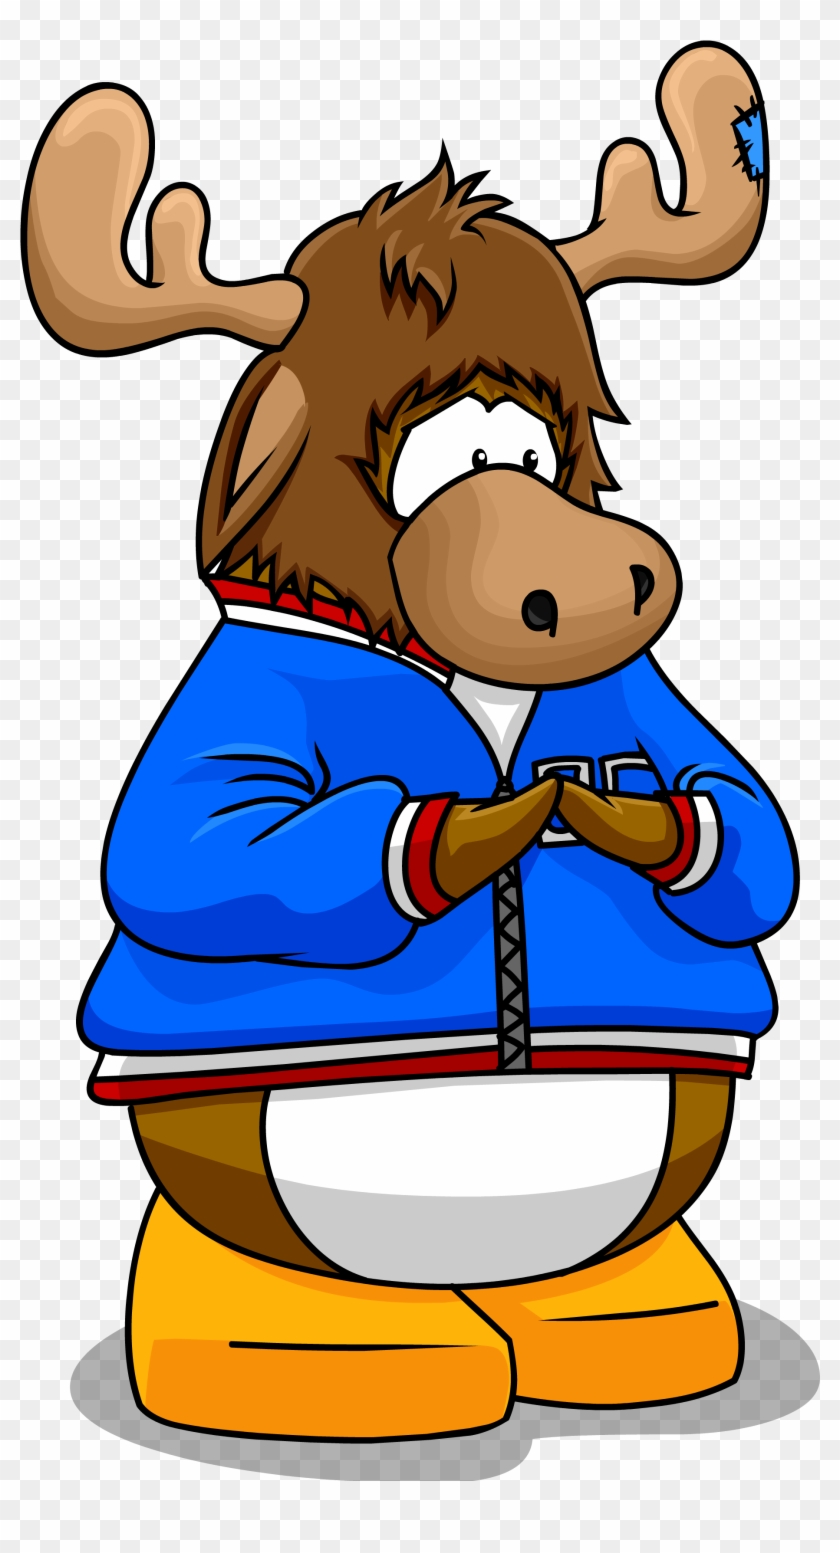 Png Royalty Free Stock Image The Moose Png Club Penguin - Club Penguin Team Red Or Team Blue #1605830